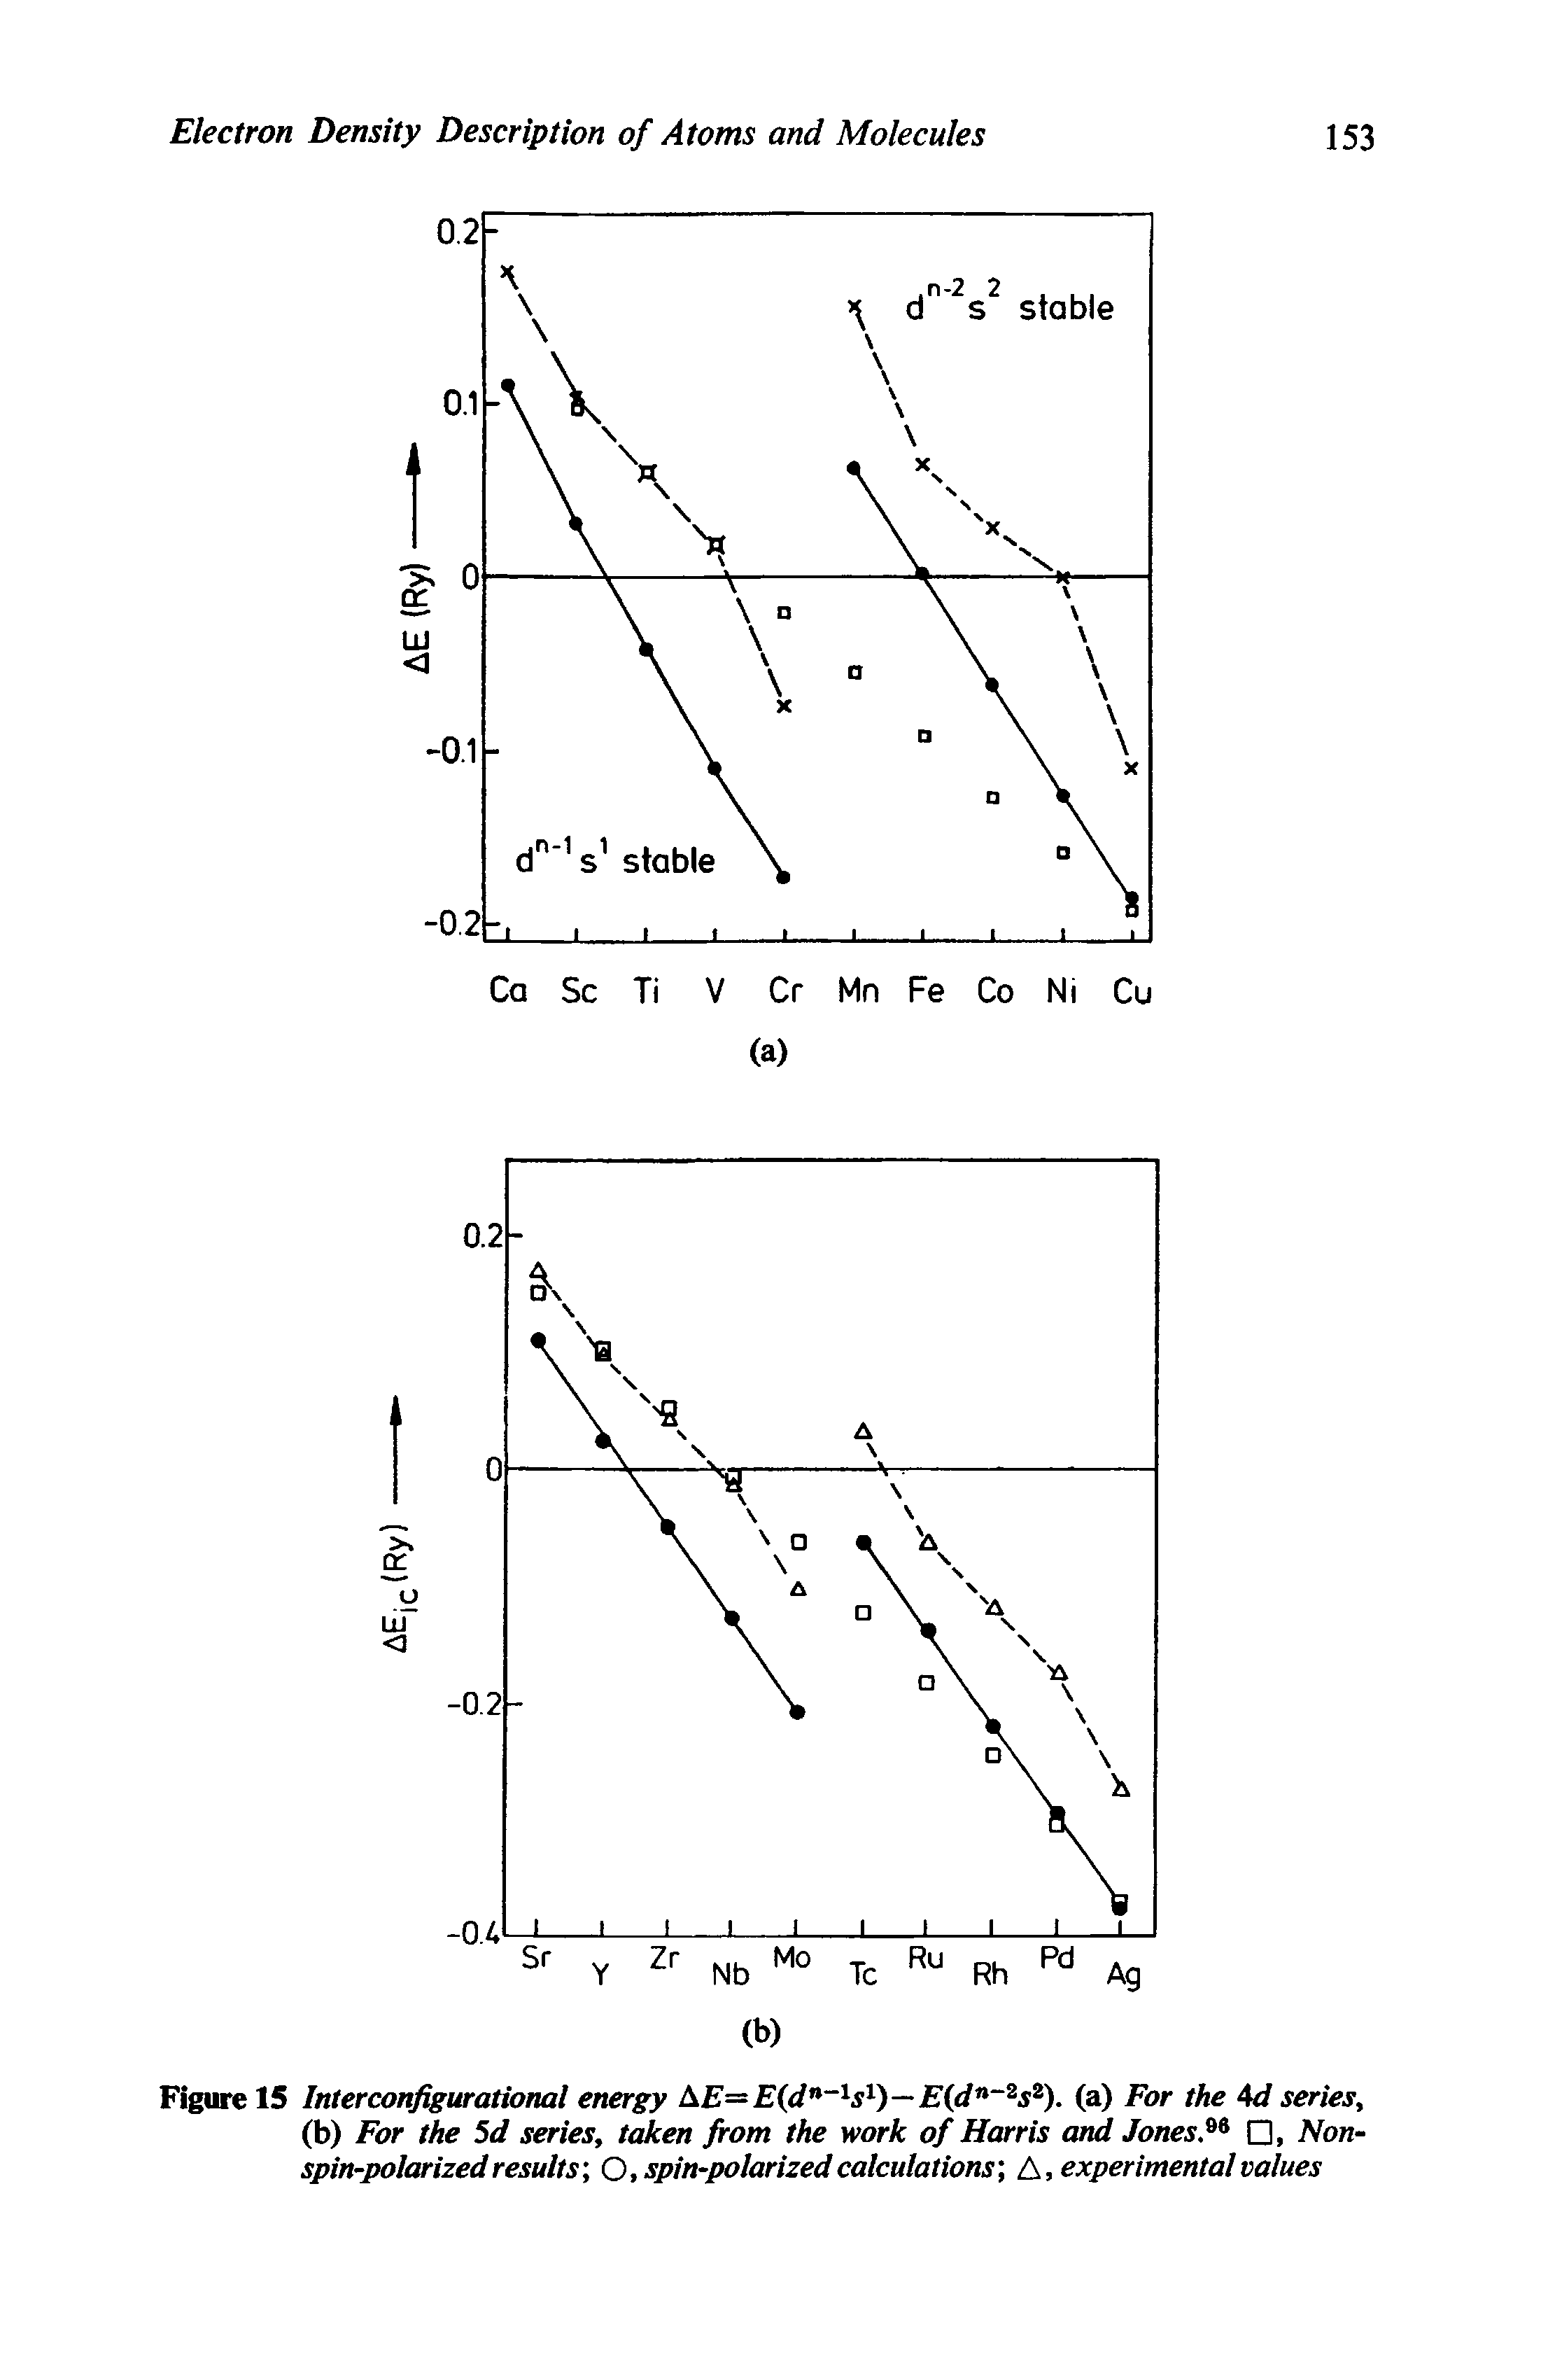 Figure 15 Interconfigurational energy AE= E(dn 1s1)—E(dn 2s2). (a) For the 4d series, (b) For the 5d series, taken from the work of Harris and Jones.96 , Nonspin-polarized results O, spin-polarized calculations, A, experimental values...